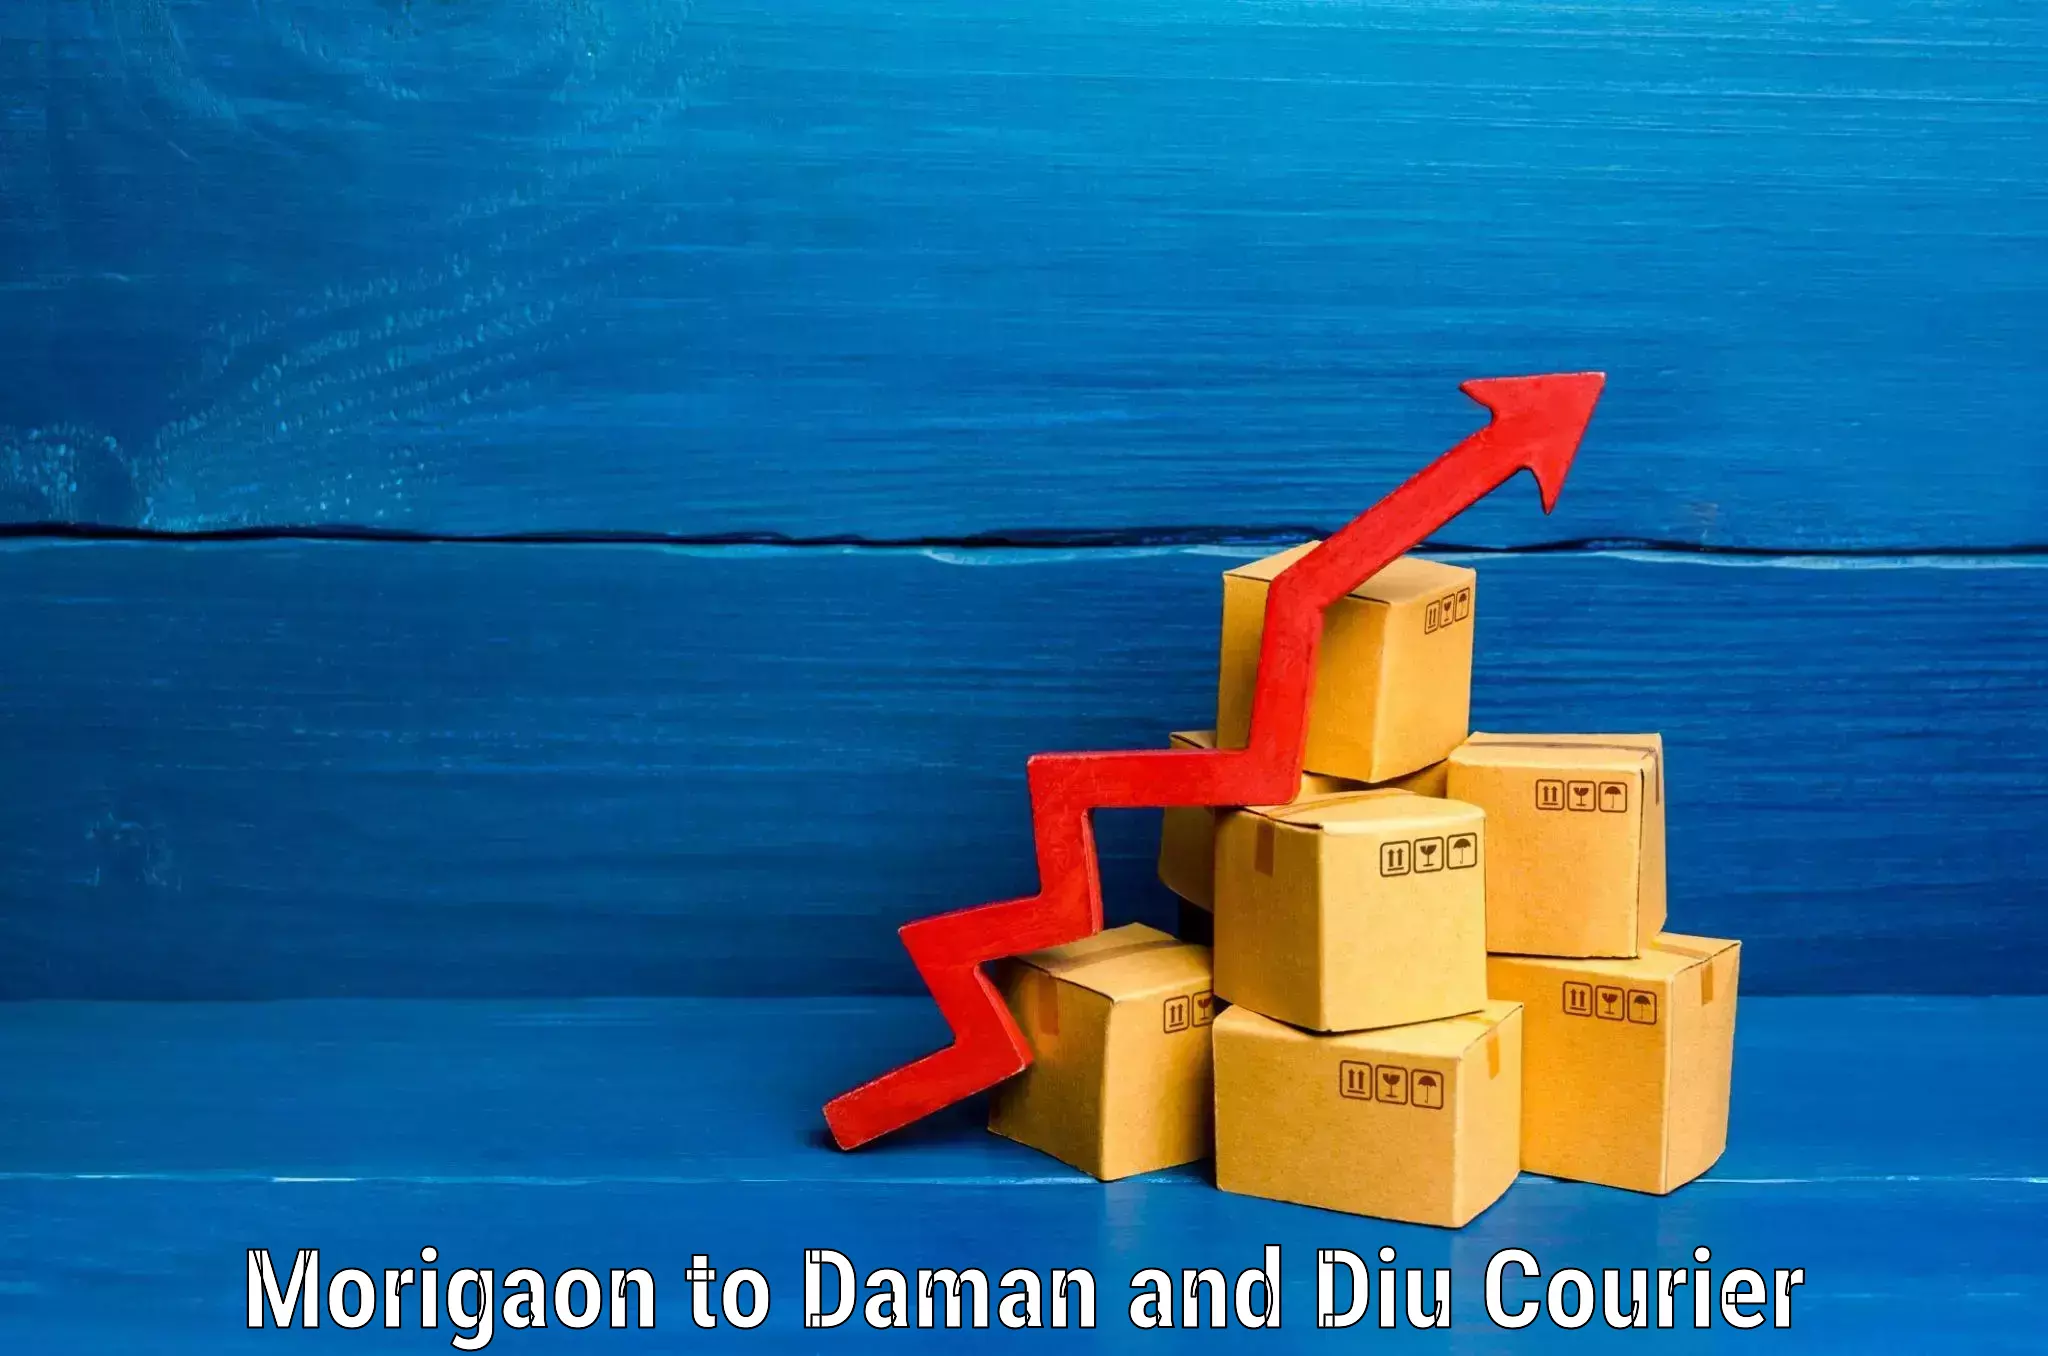 Luggage transport consulting Morigaon to Daman and Diu